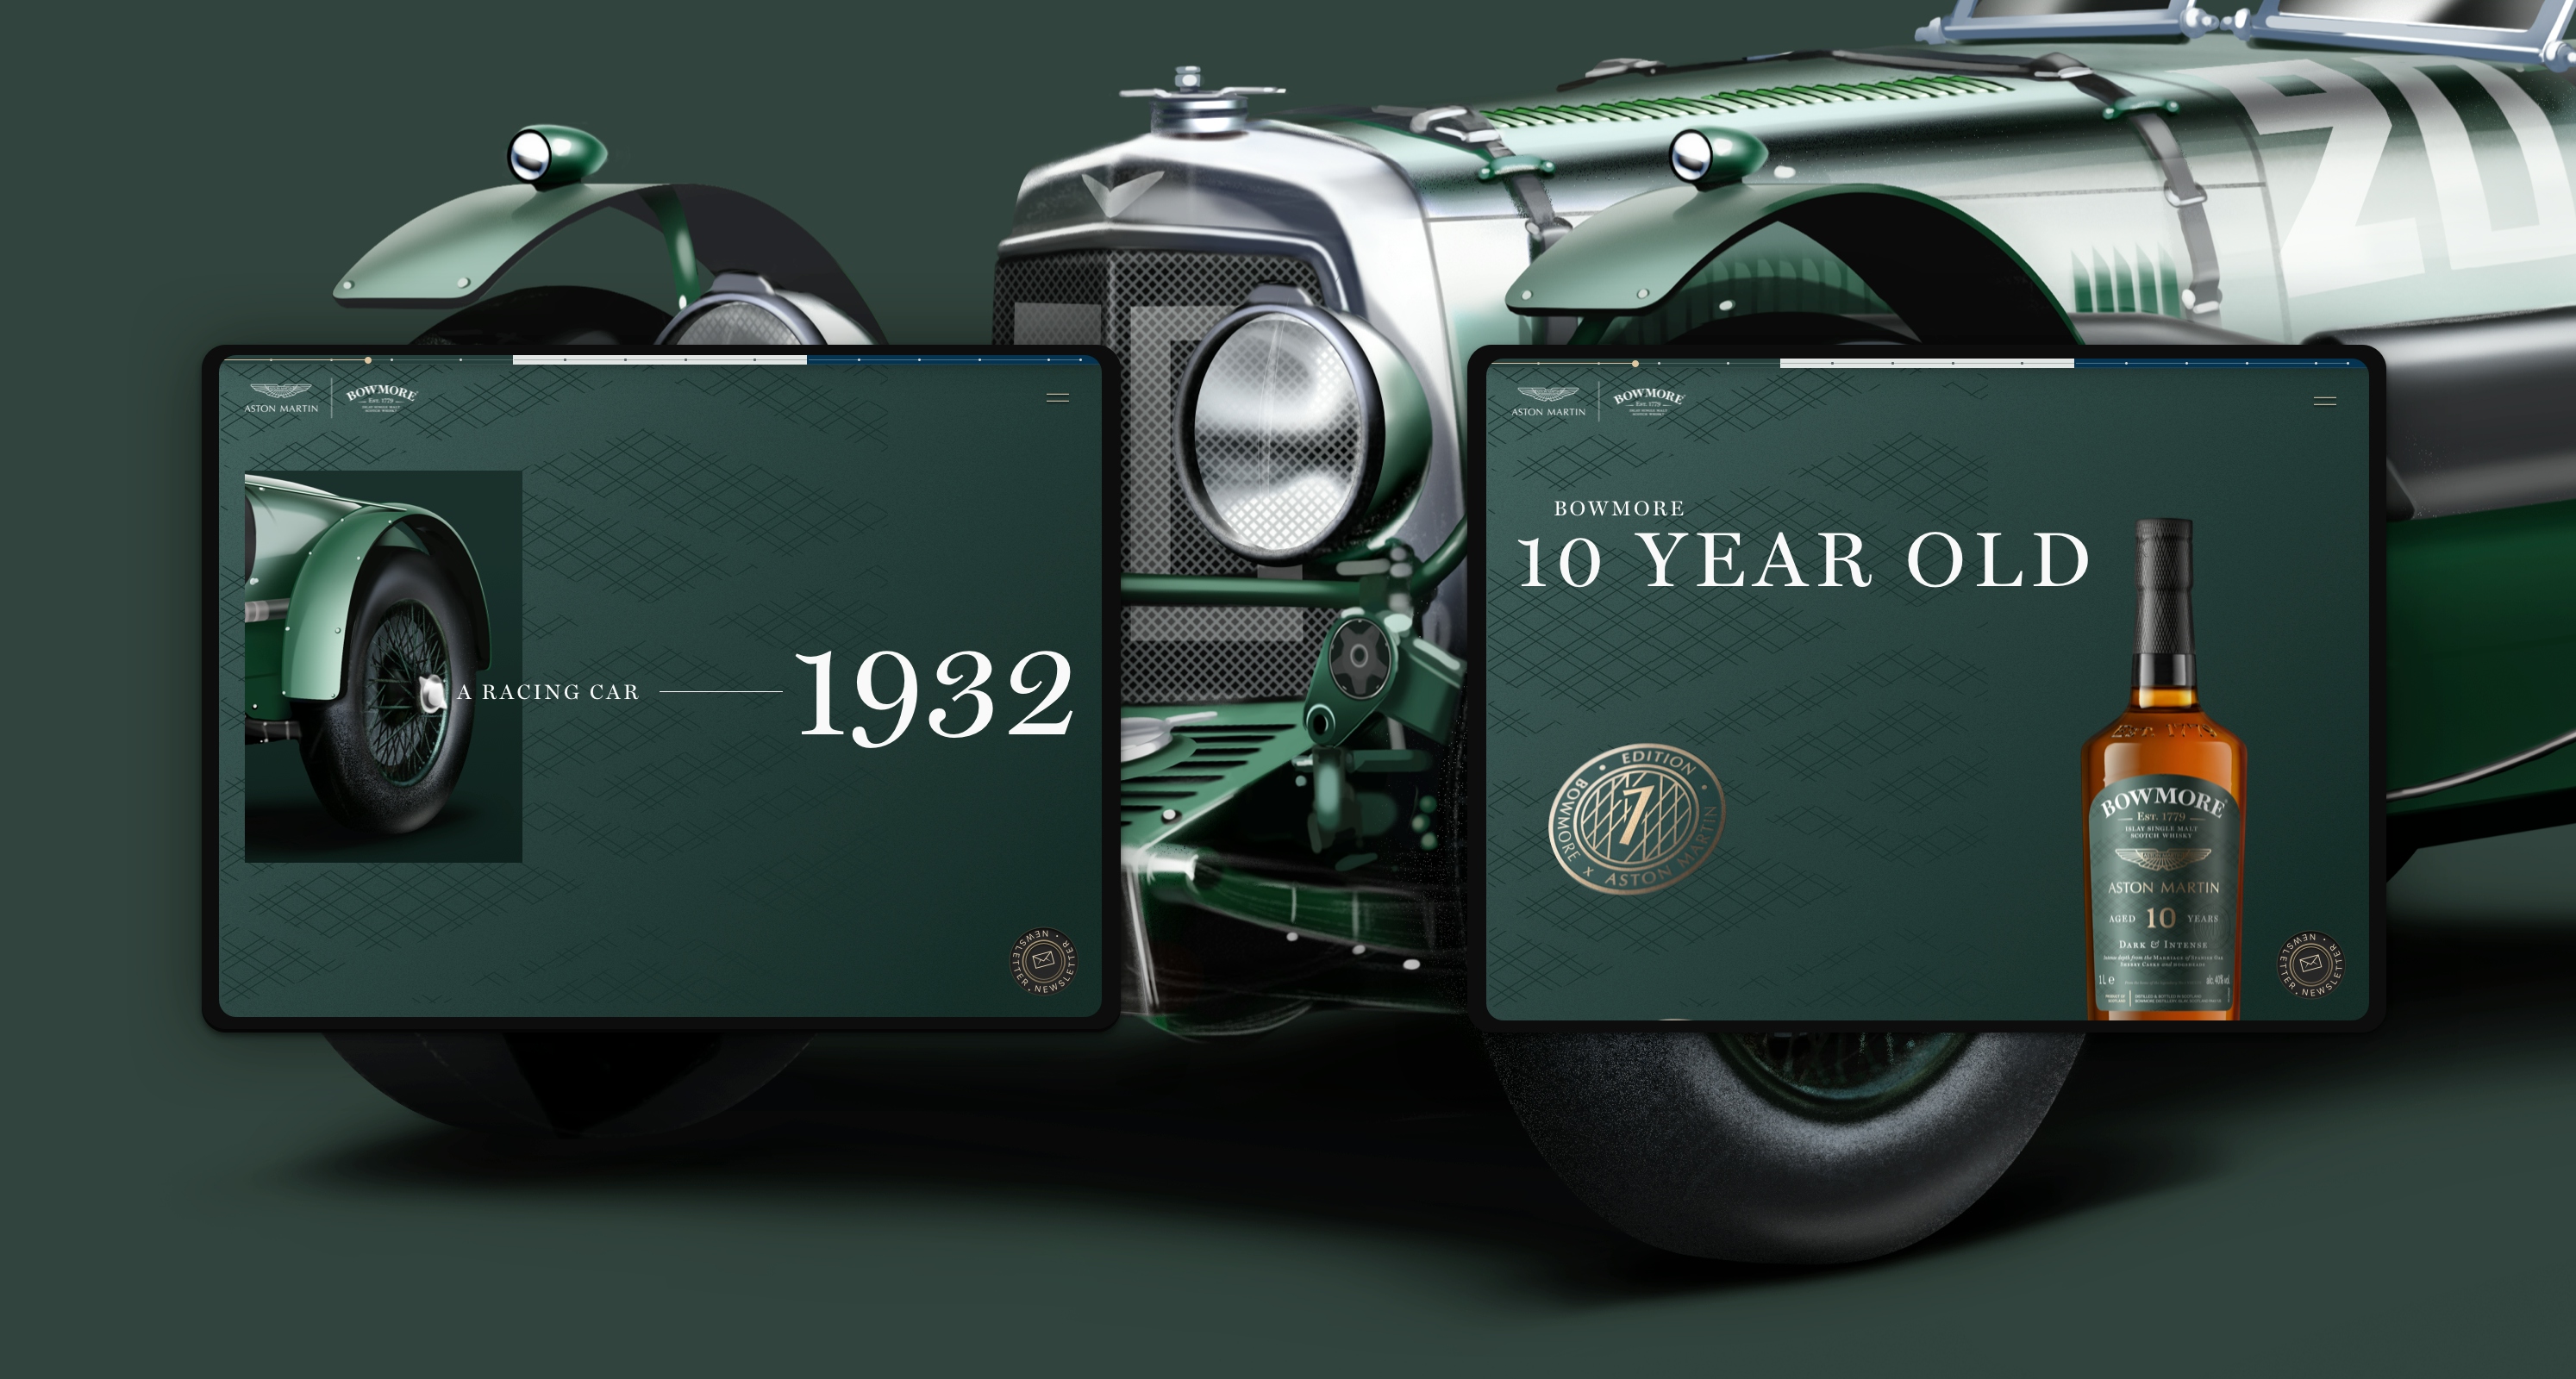 Two digital images are superimposed on a 1932 Aston Martin Le mans work" classic 1932 model car. The first superimposed image is racing green and features the text “1932: a racing car” which is superimposed onto the back wheel of the same model of car. The second superimposed image is cut but features the text “Bowmore: 10 year old”. This image is to showcase the Bowmore Aston Martin 10 year old whisky bottle